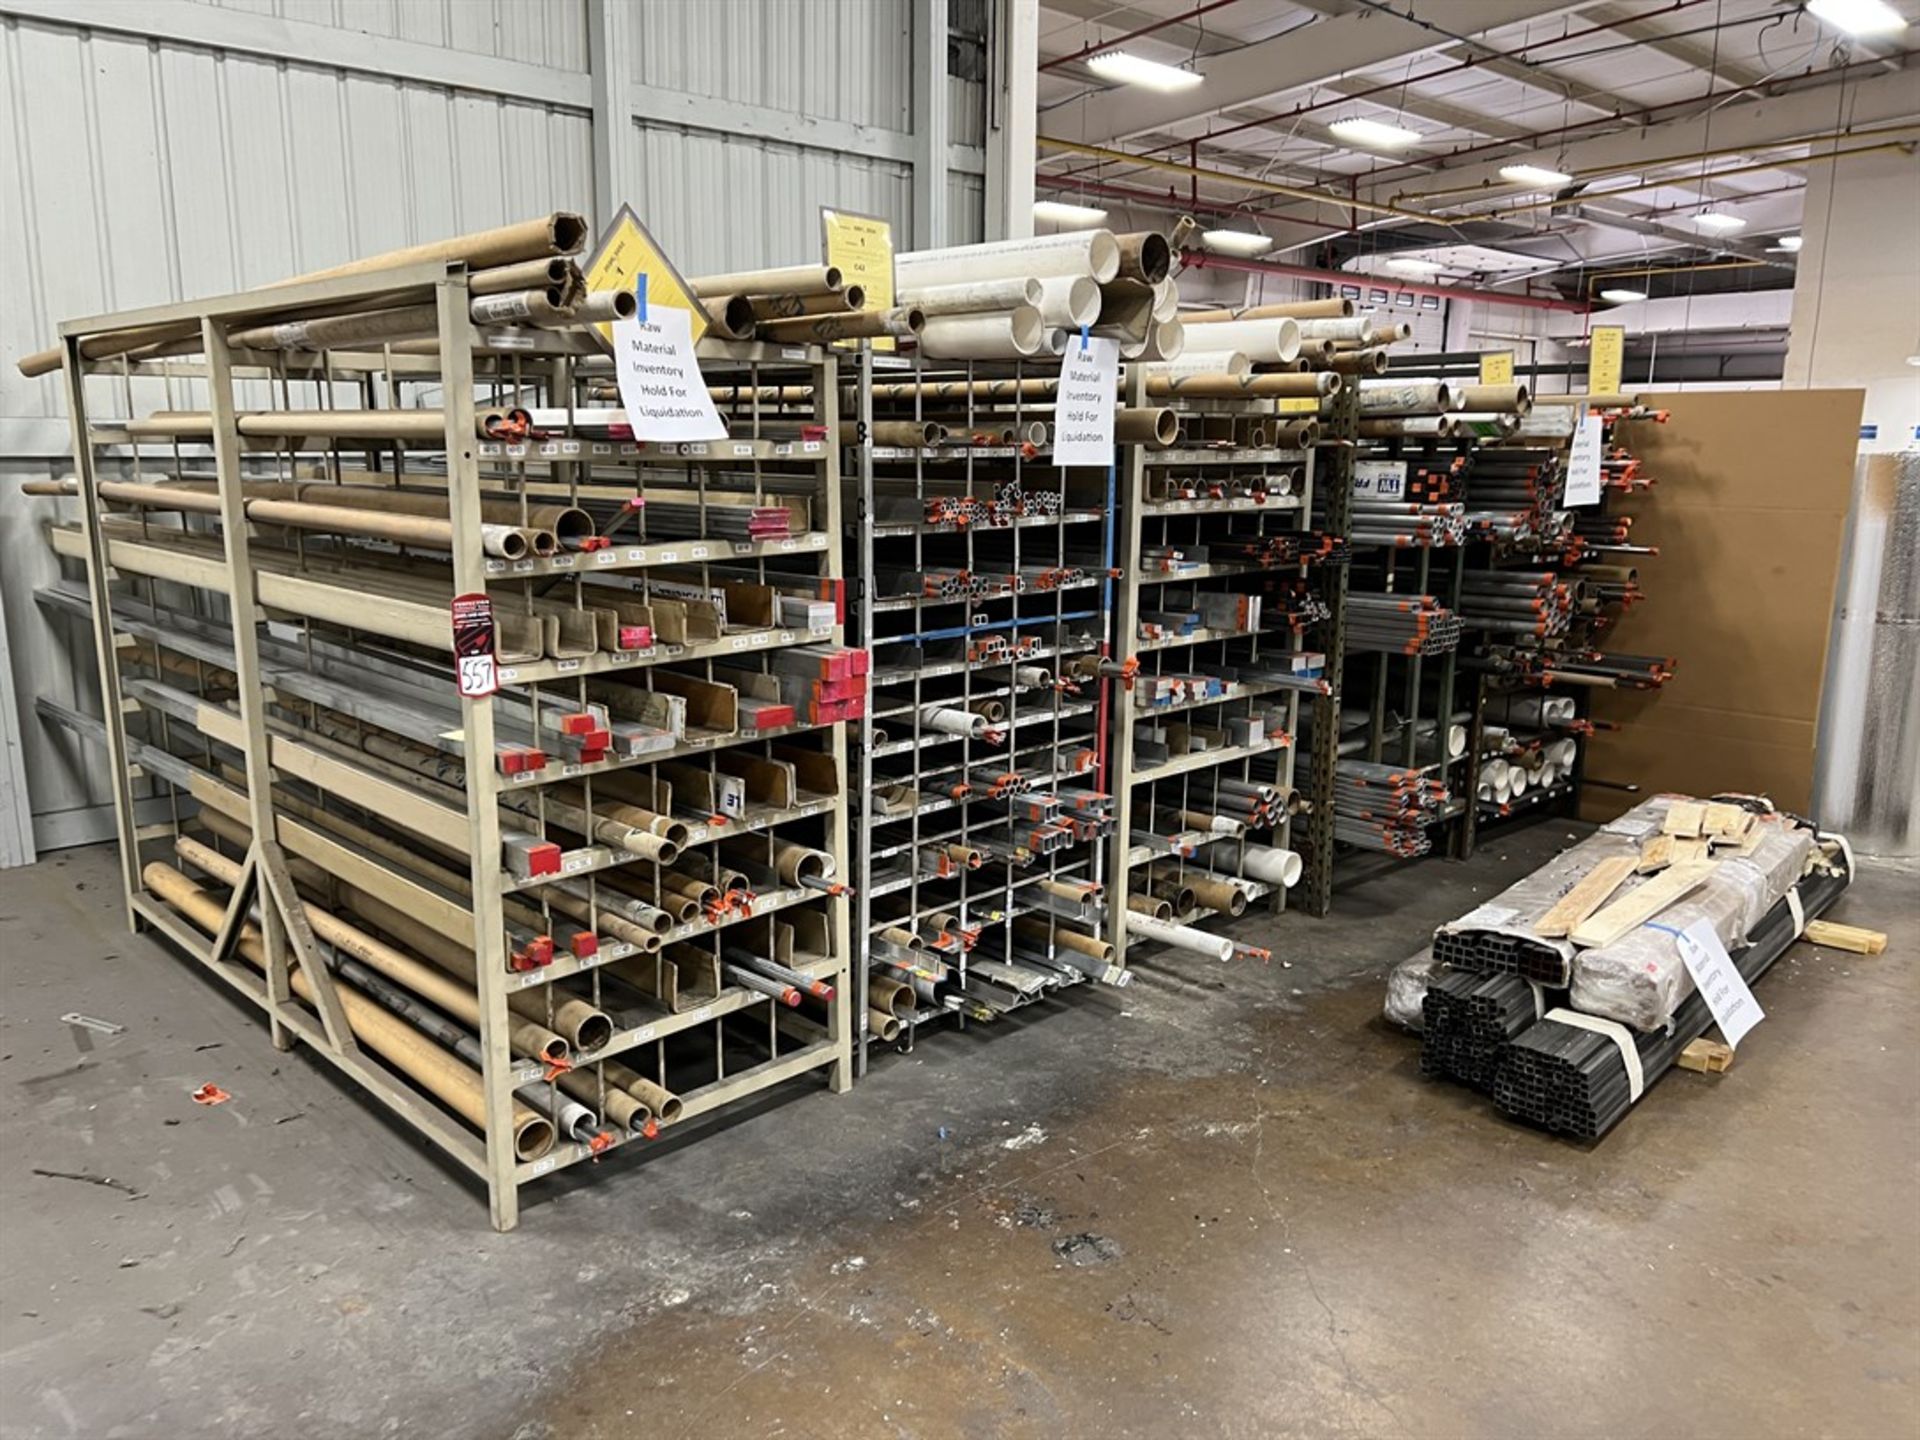 Lot of Stock Racks w/ Assorted Stock Including Aluminum and Steel Flat stock, Round Tubing, and